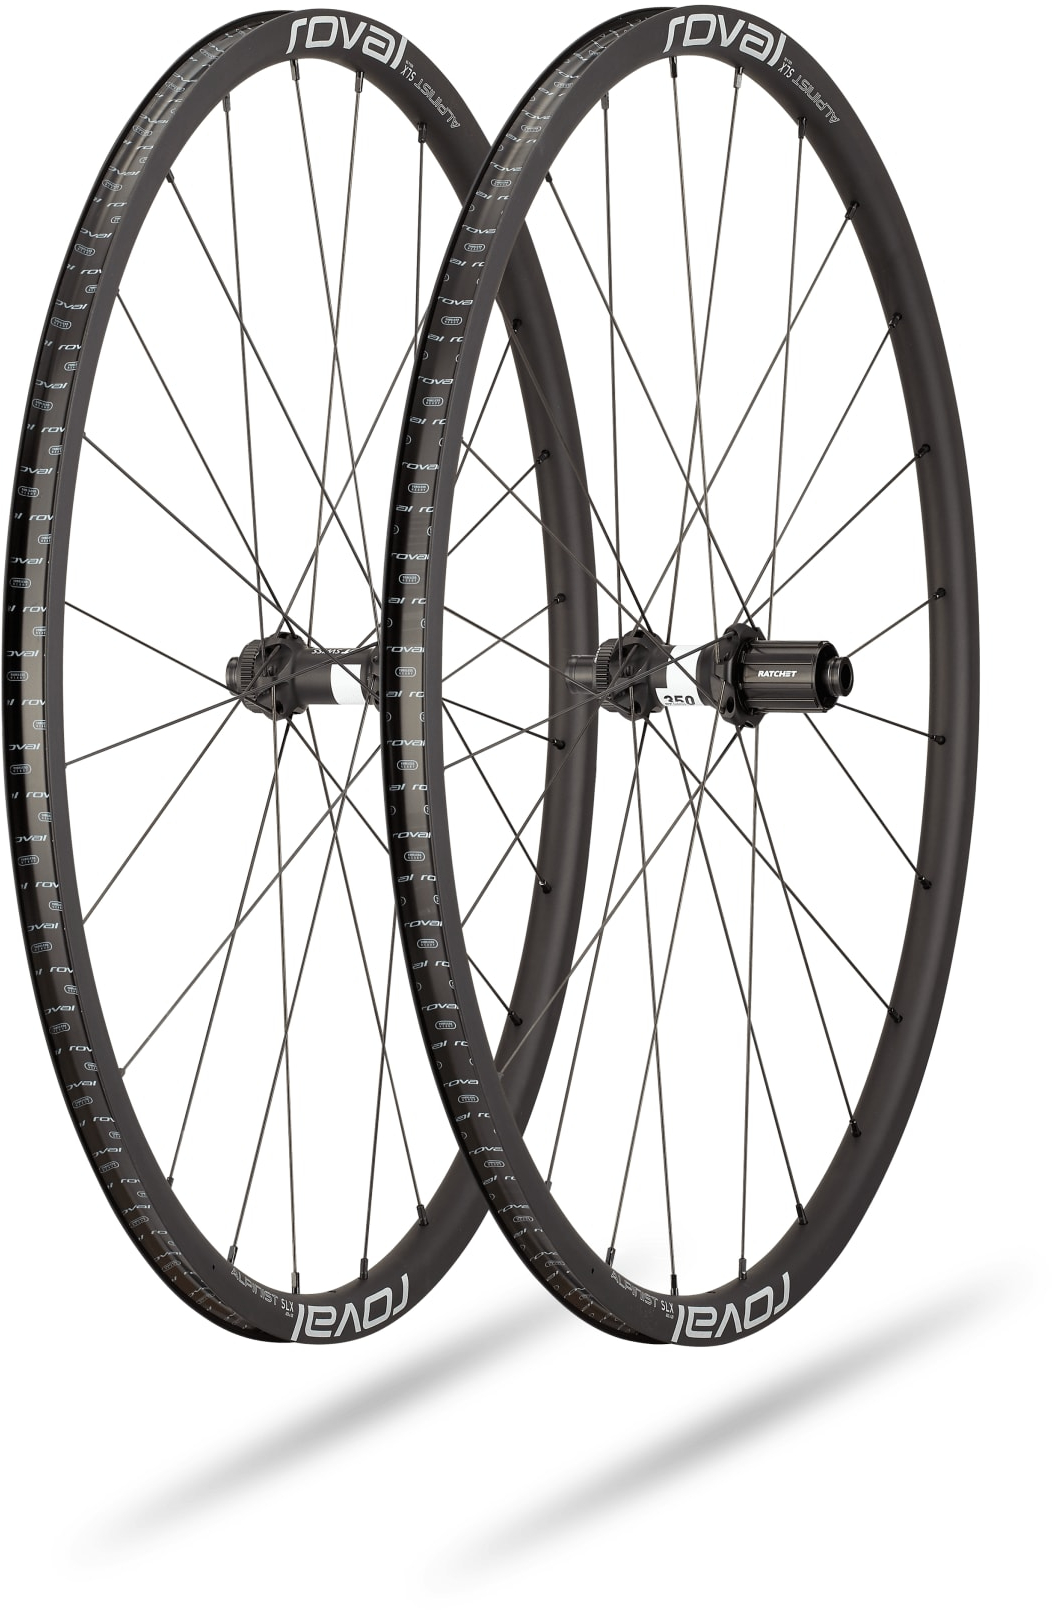 Cycles UK Specialized  Alpinist SLX Disc Wheels 700c Front Black/Charcoal